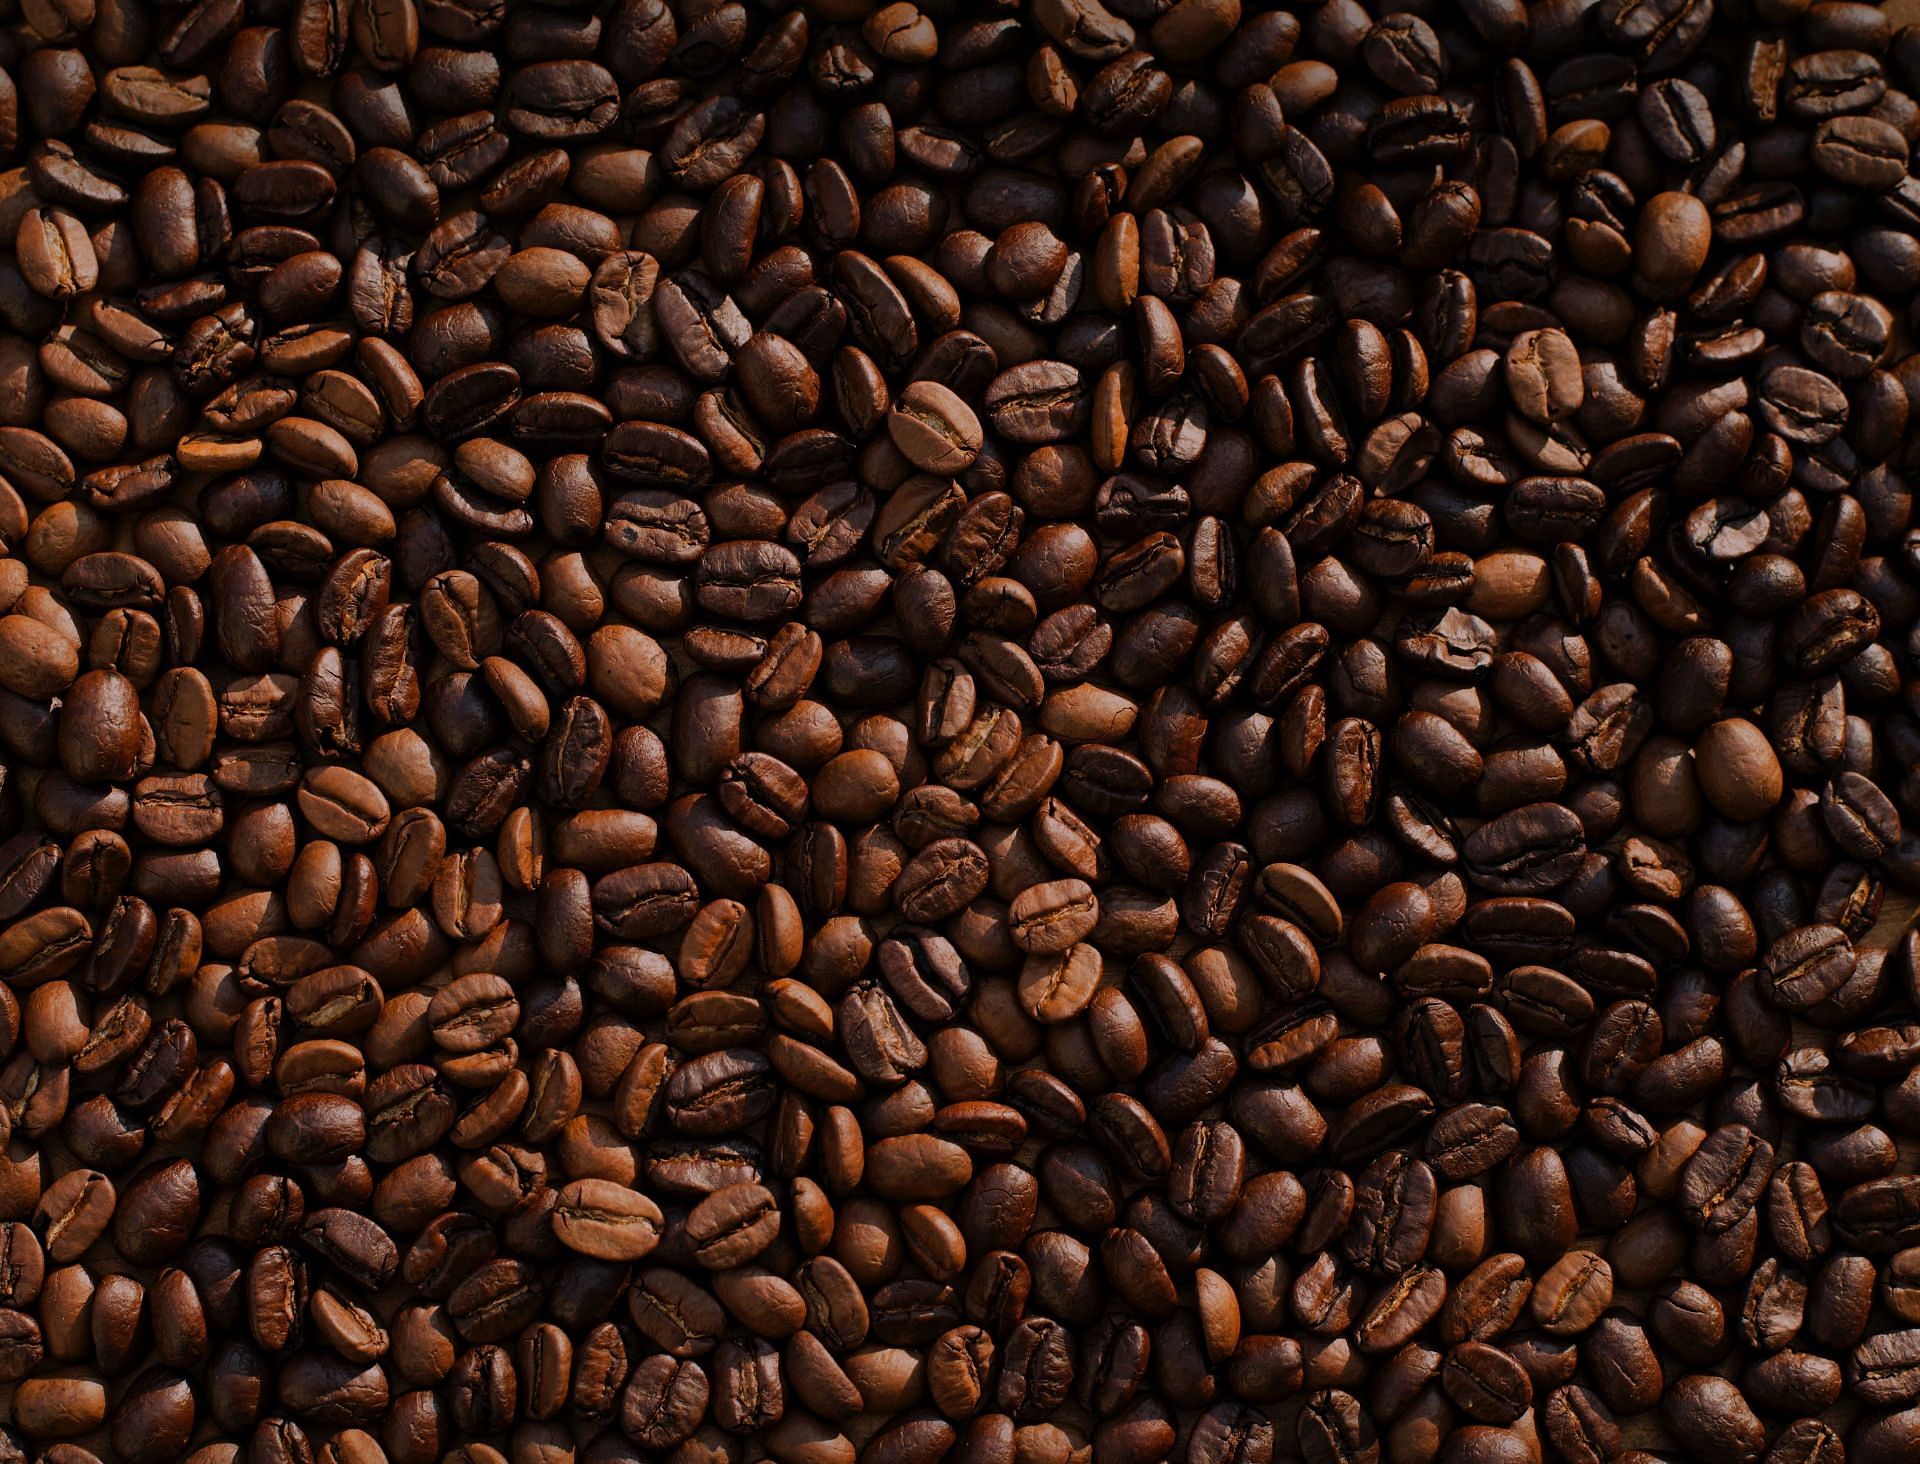 Try different beans of coffee. (image via Unsplash/Mike Kenneally )